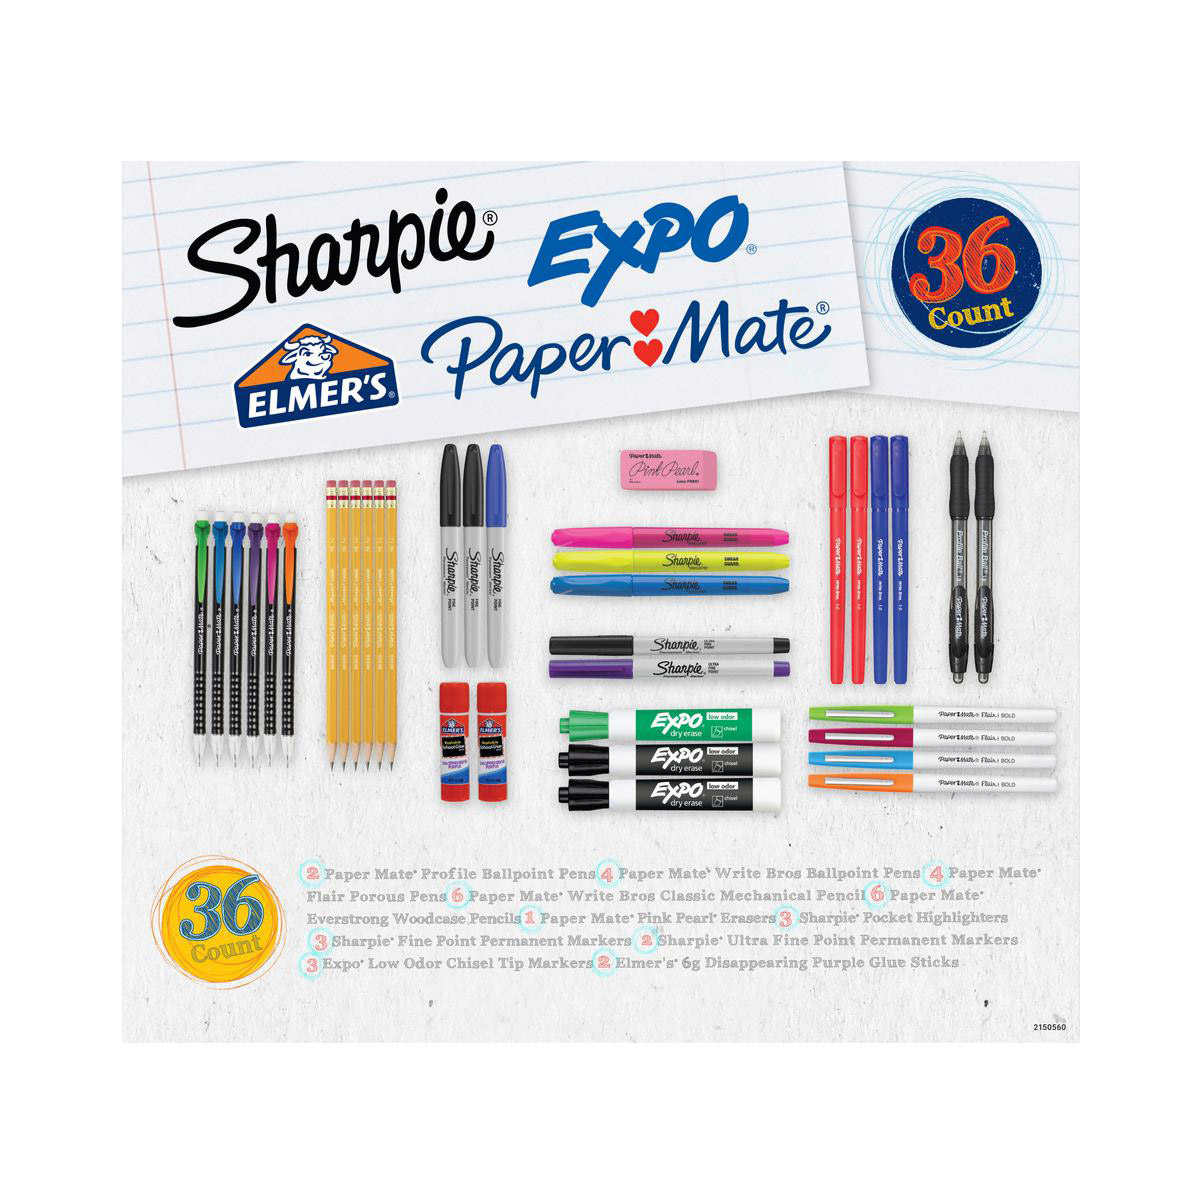 Wholesale Other Office School Supplies Fabric Markers Pens 12 Dual